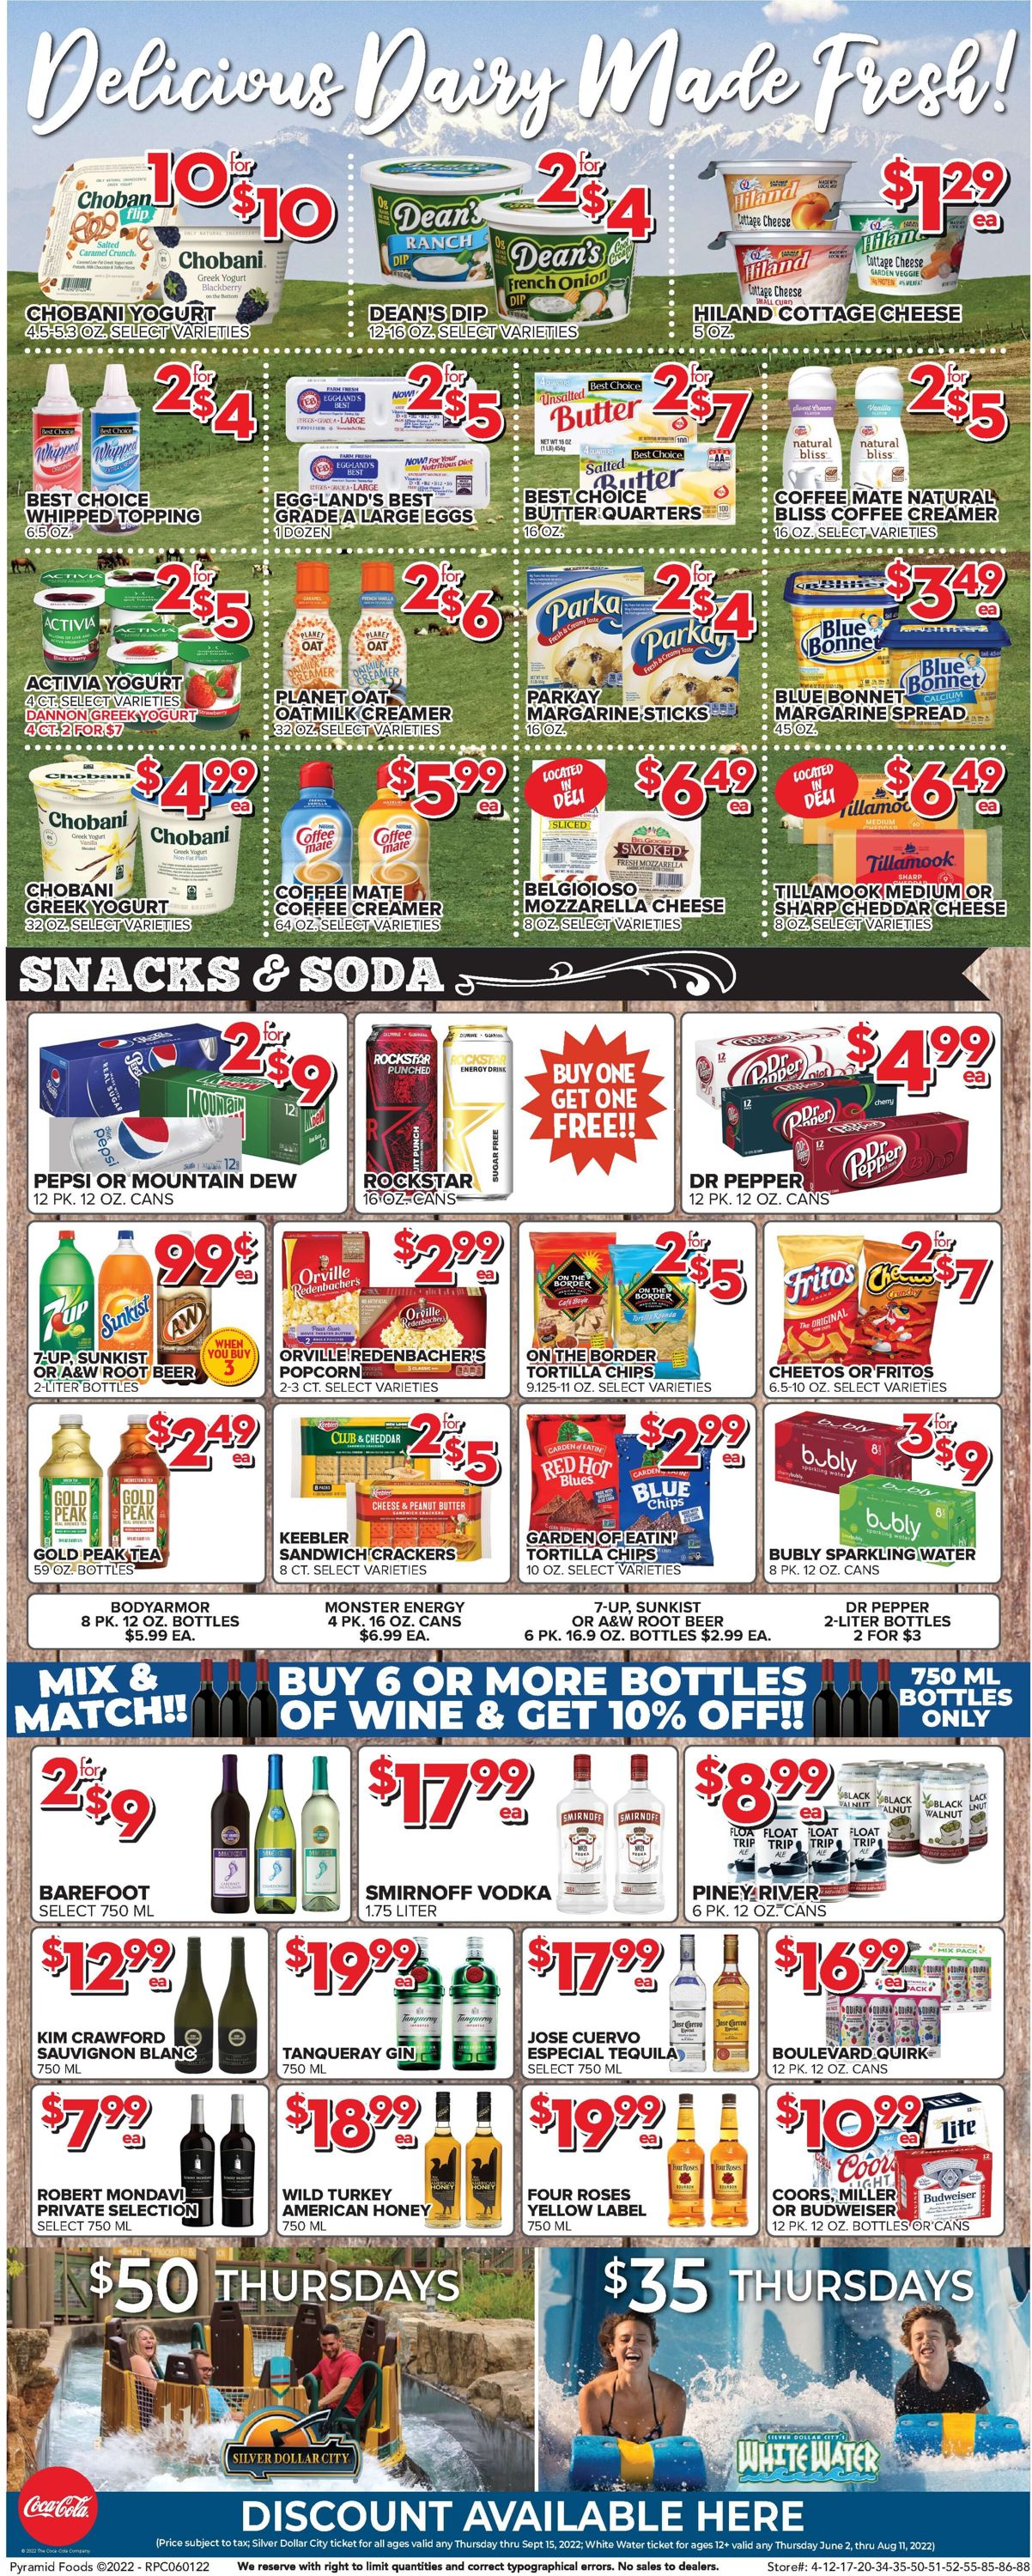 Price Cutter Weekly Ad Circular - valid 06/01-06/07/2022 (Page 4)